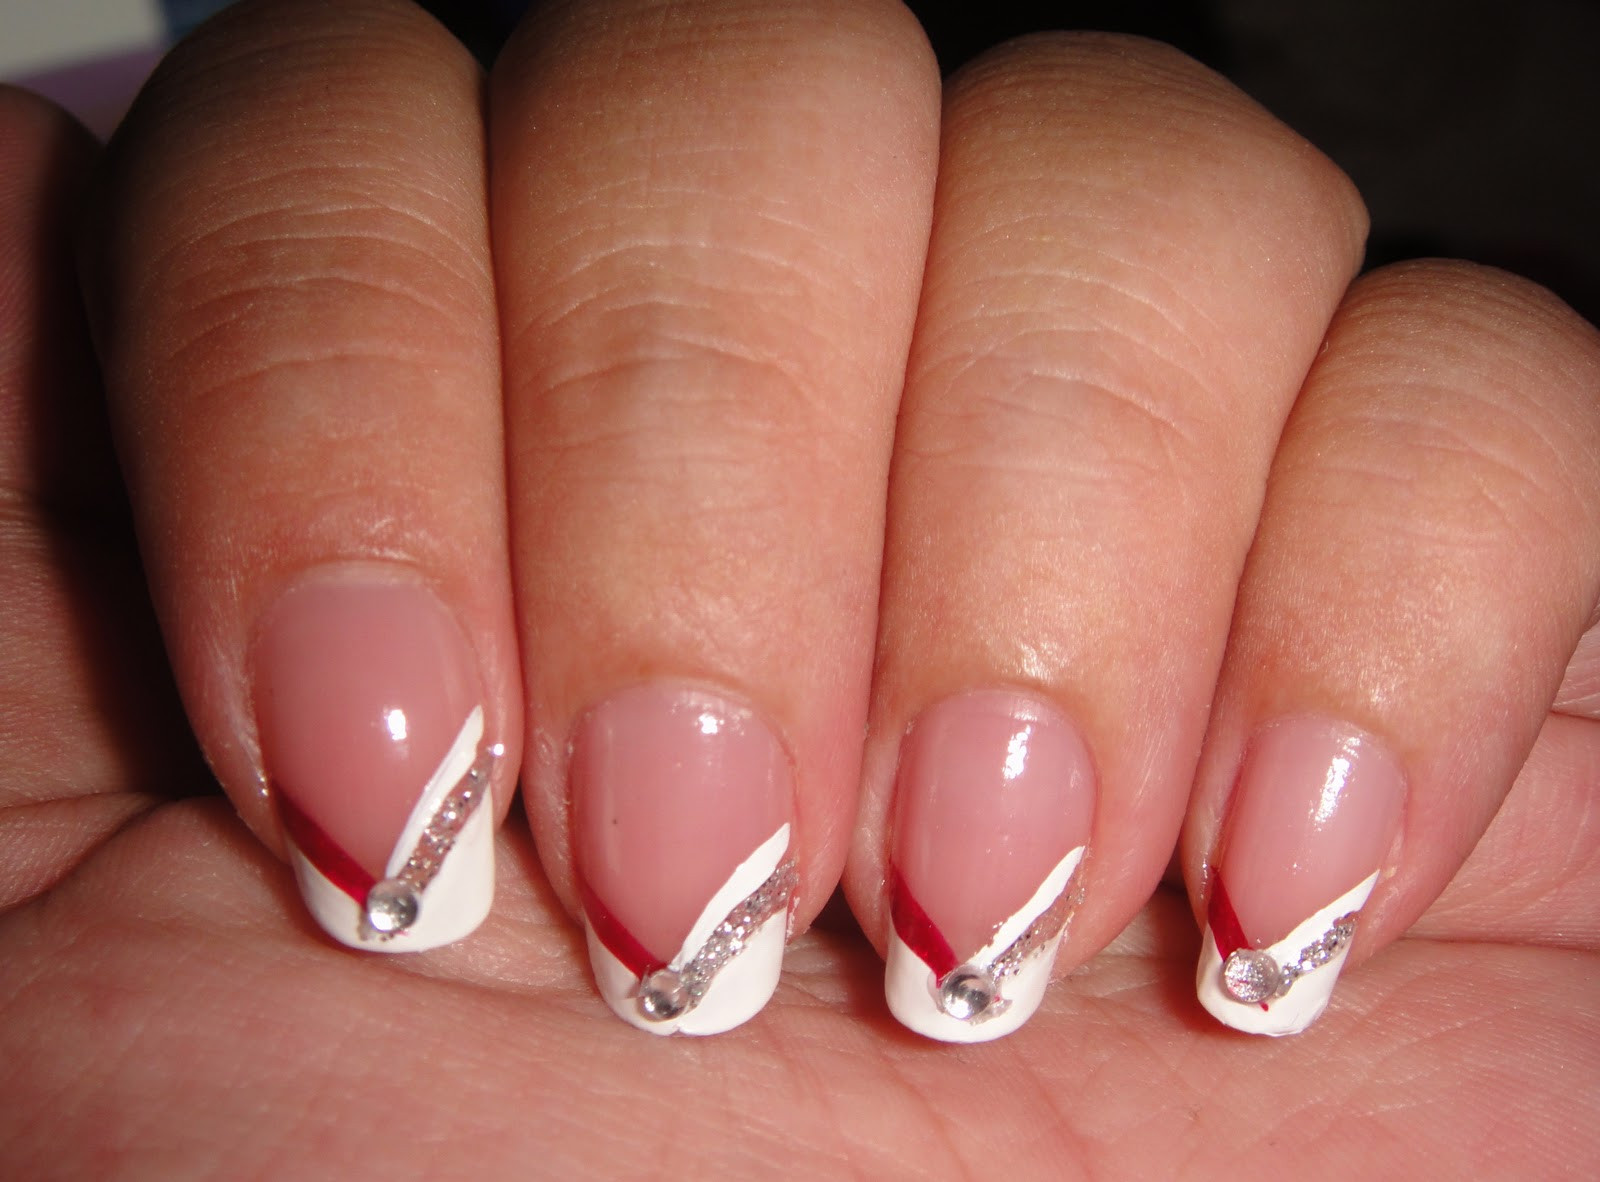 Fall French Nail Designs
 Juicy Nails & Makeup Red & Silver Chevron French Fall